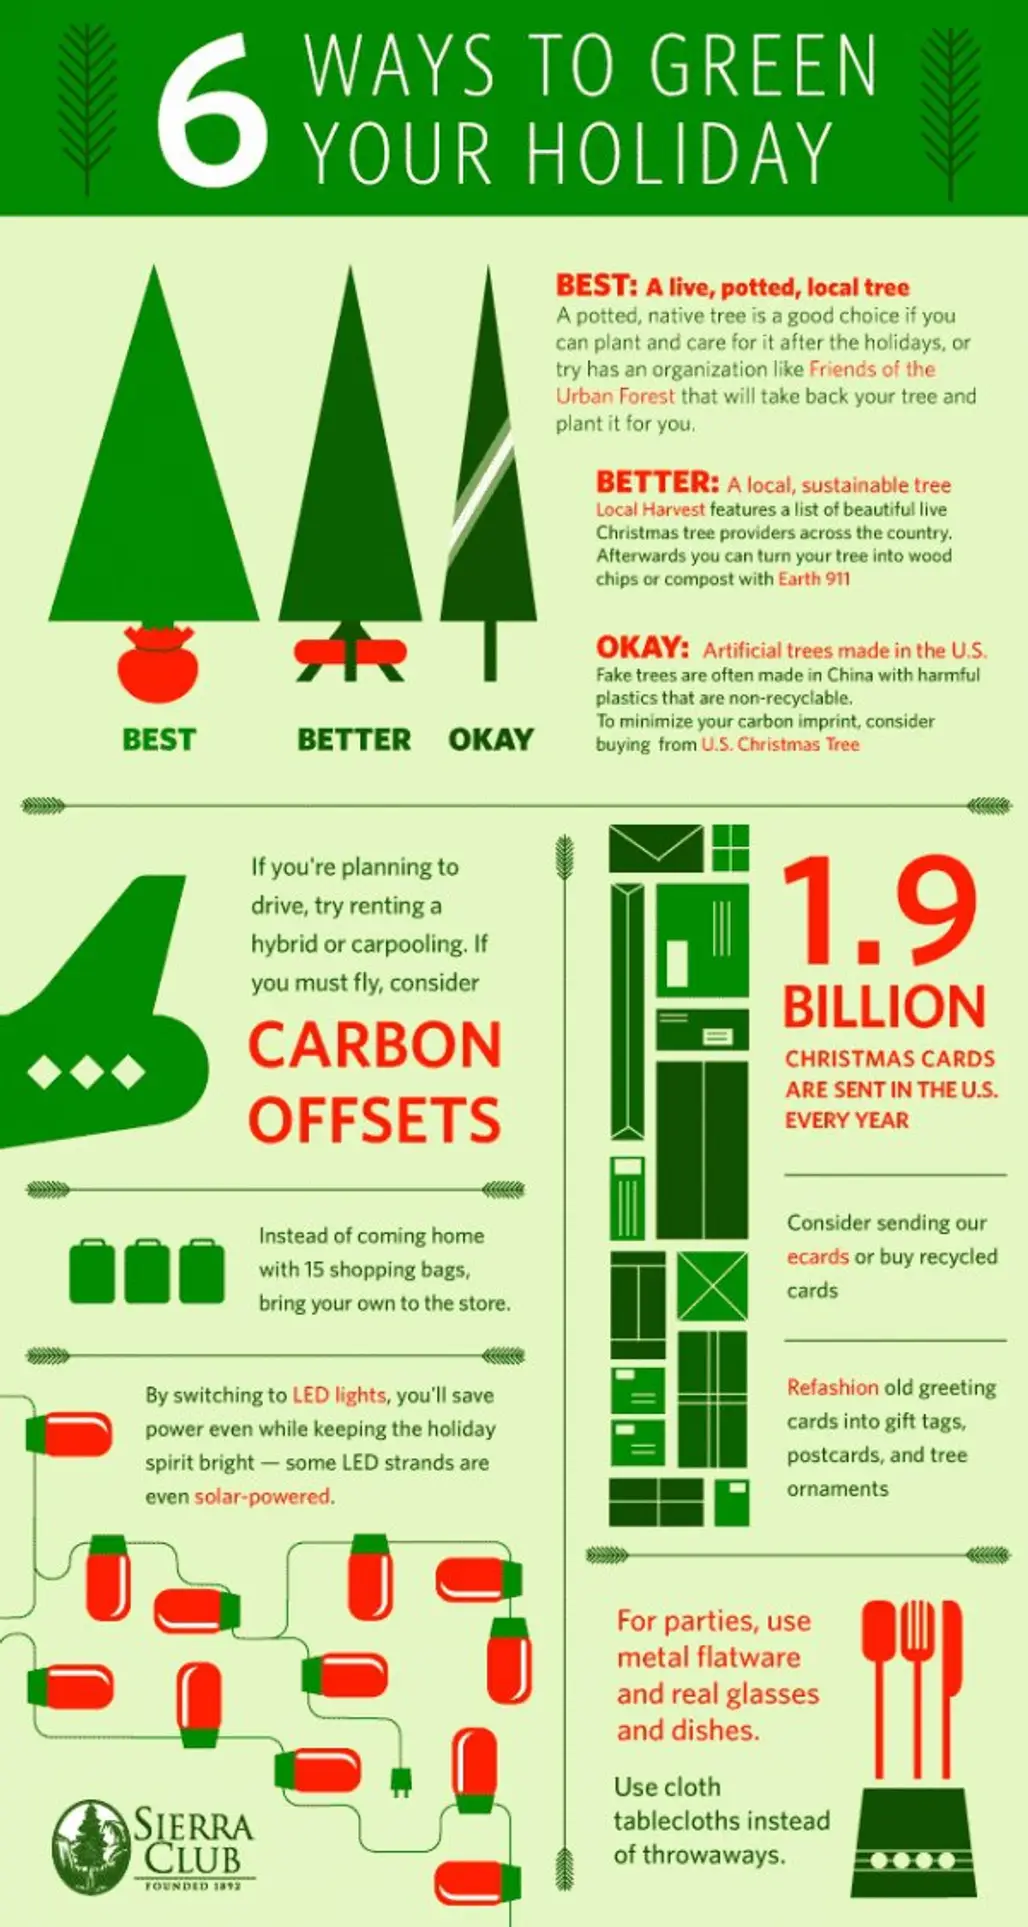 Ways to Green Your Holiday